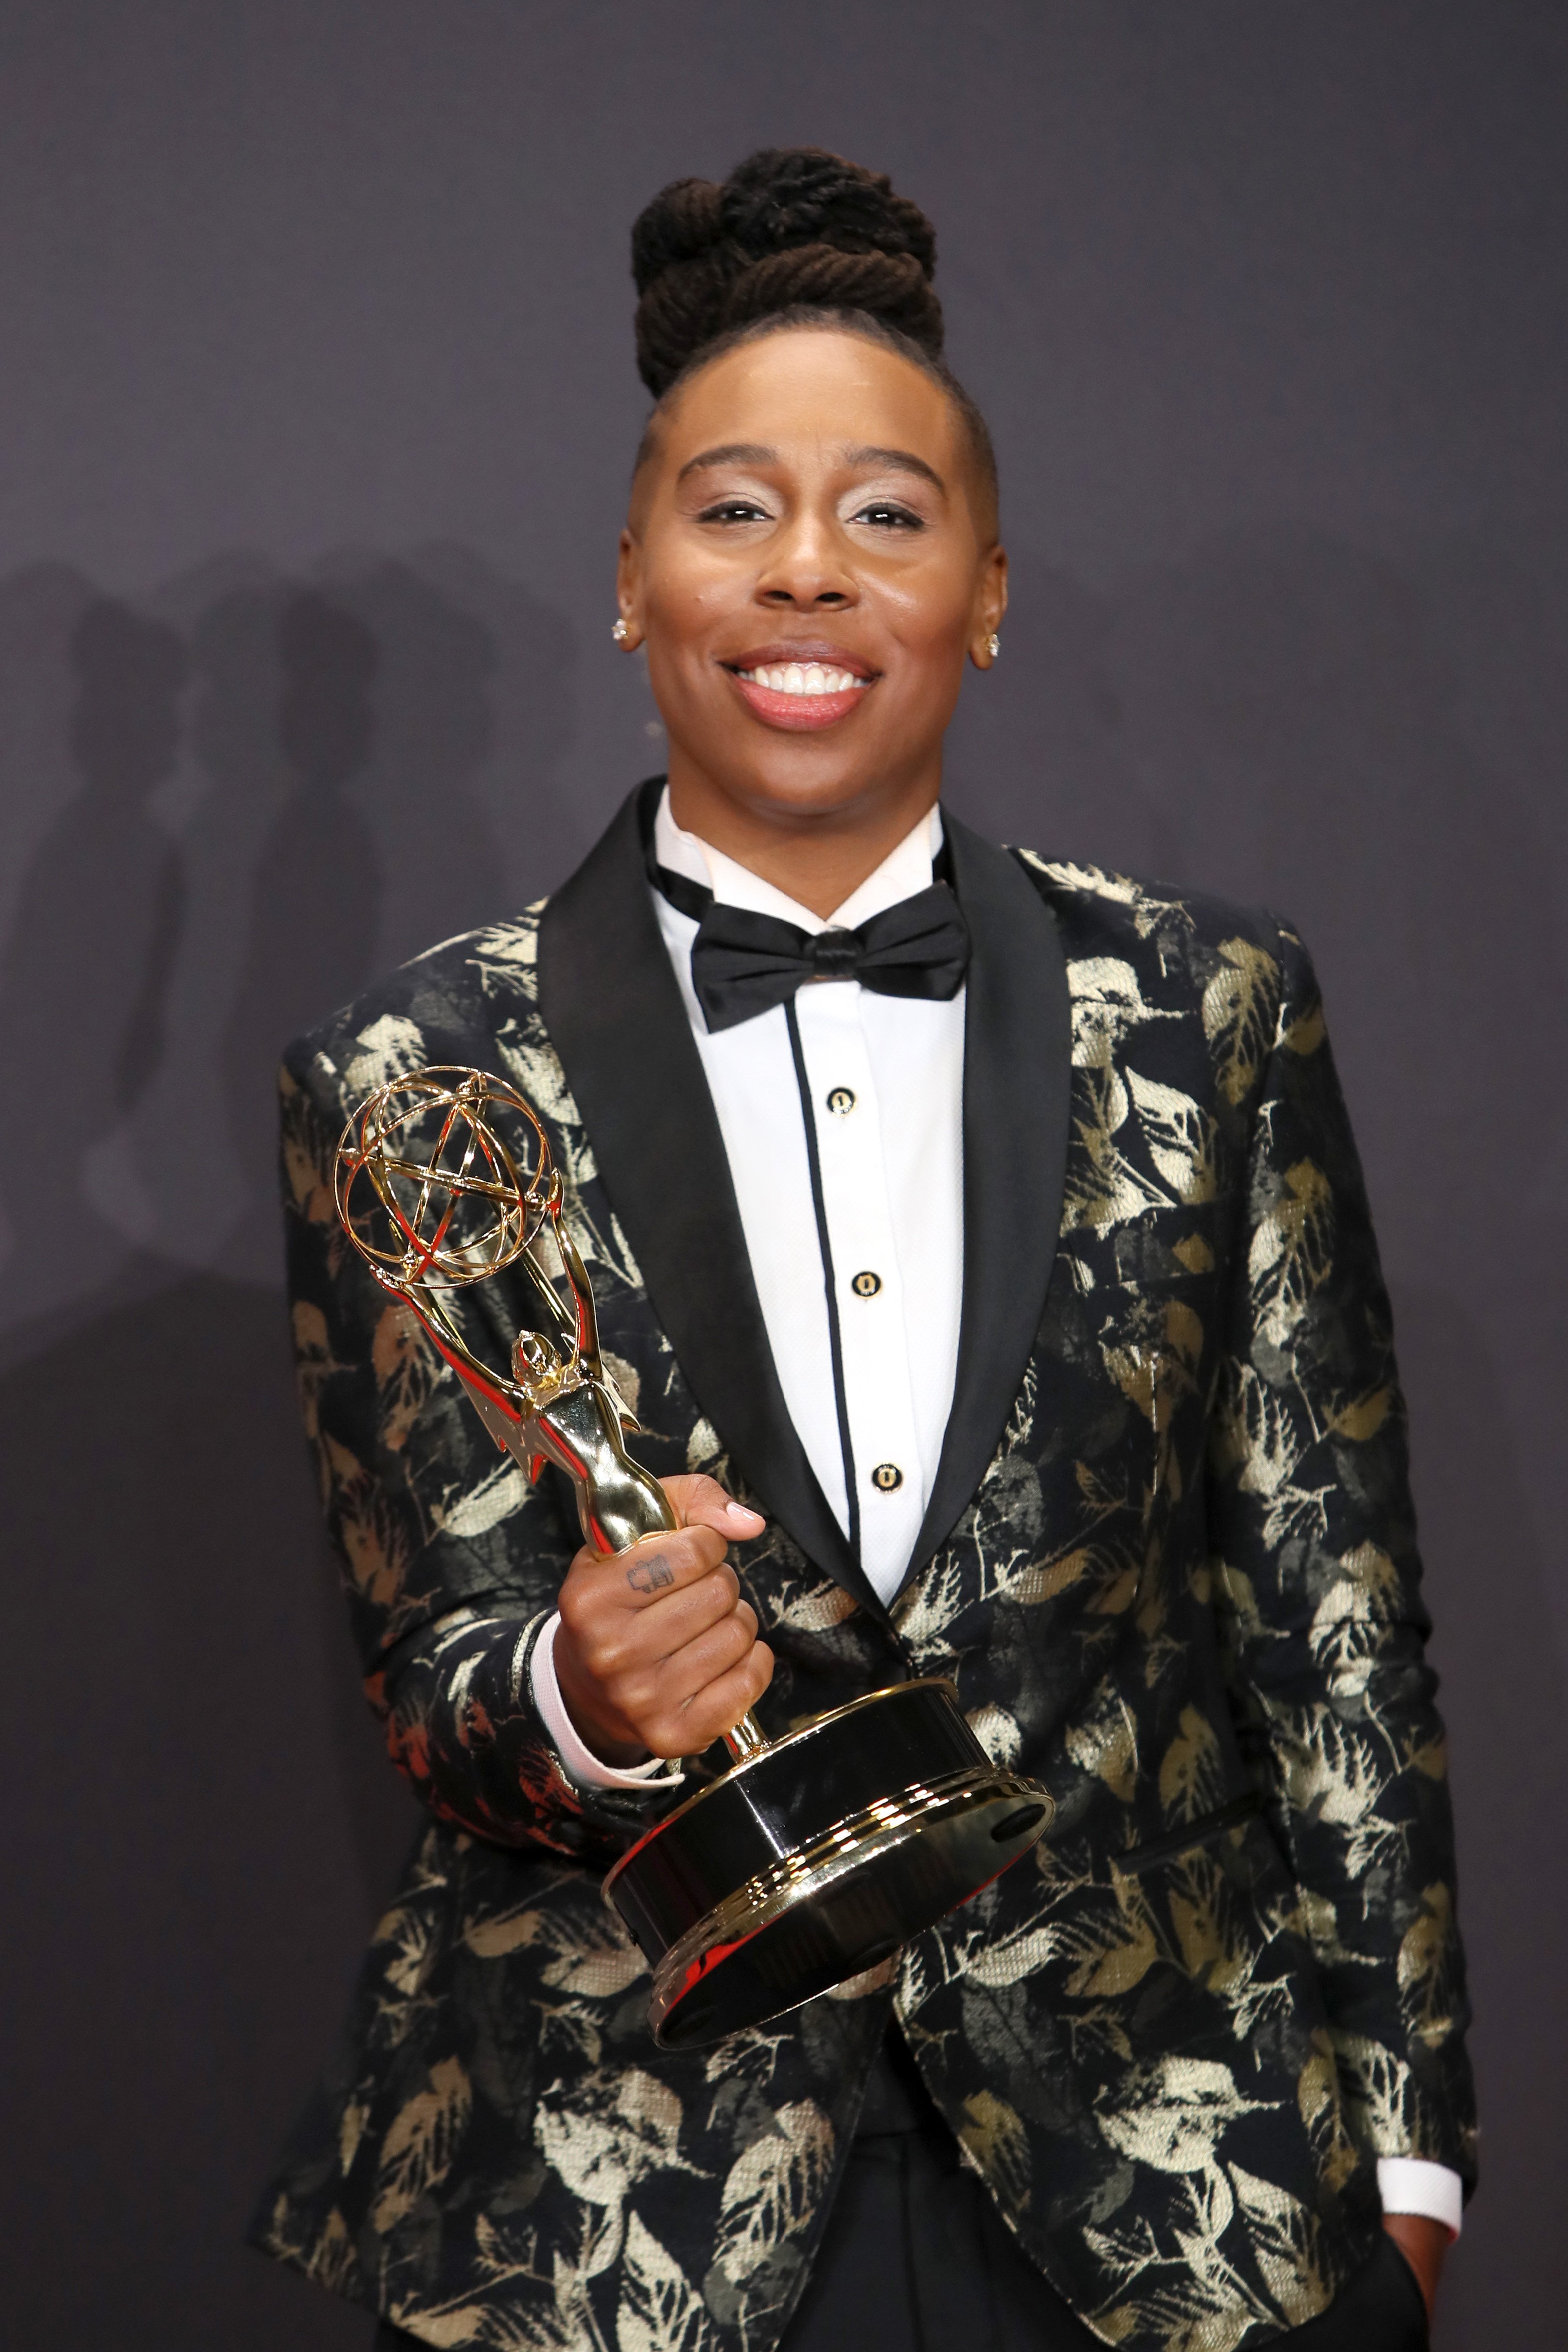 Lena Waithe clutching her Emmy Award for Outstanding Writing for a Comedy Series in September 2017. | Photo: Getty Images